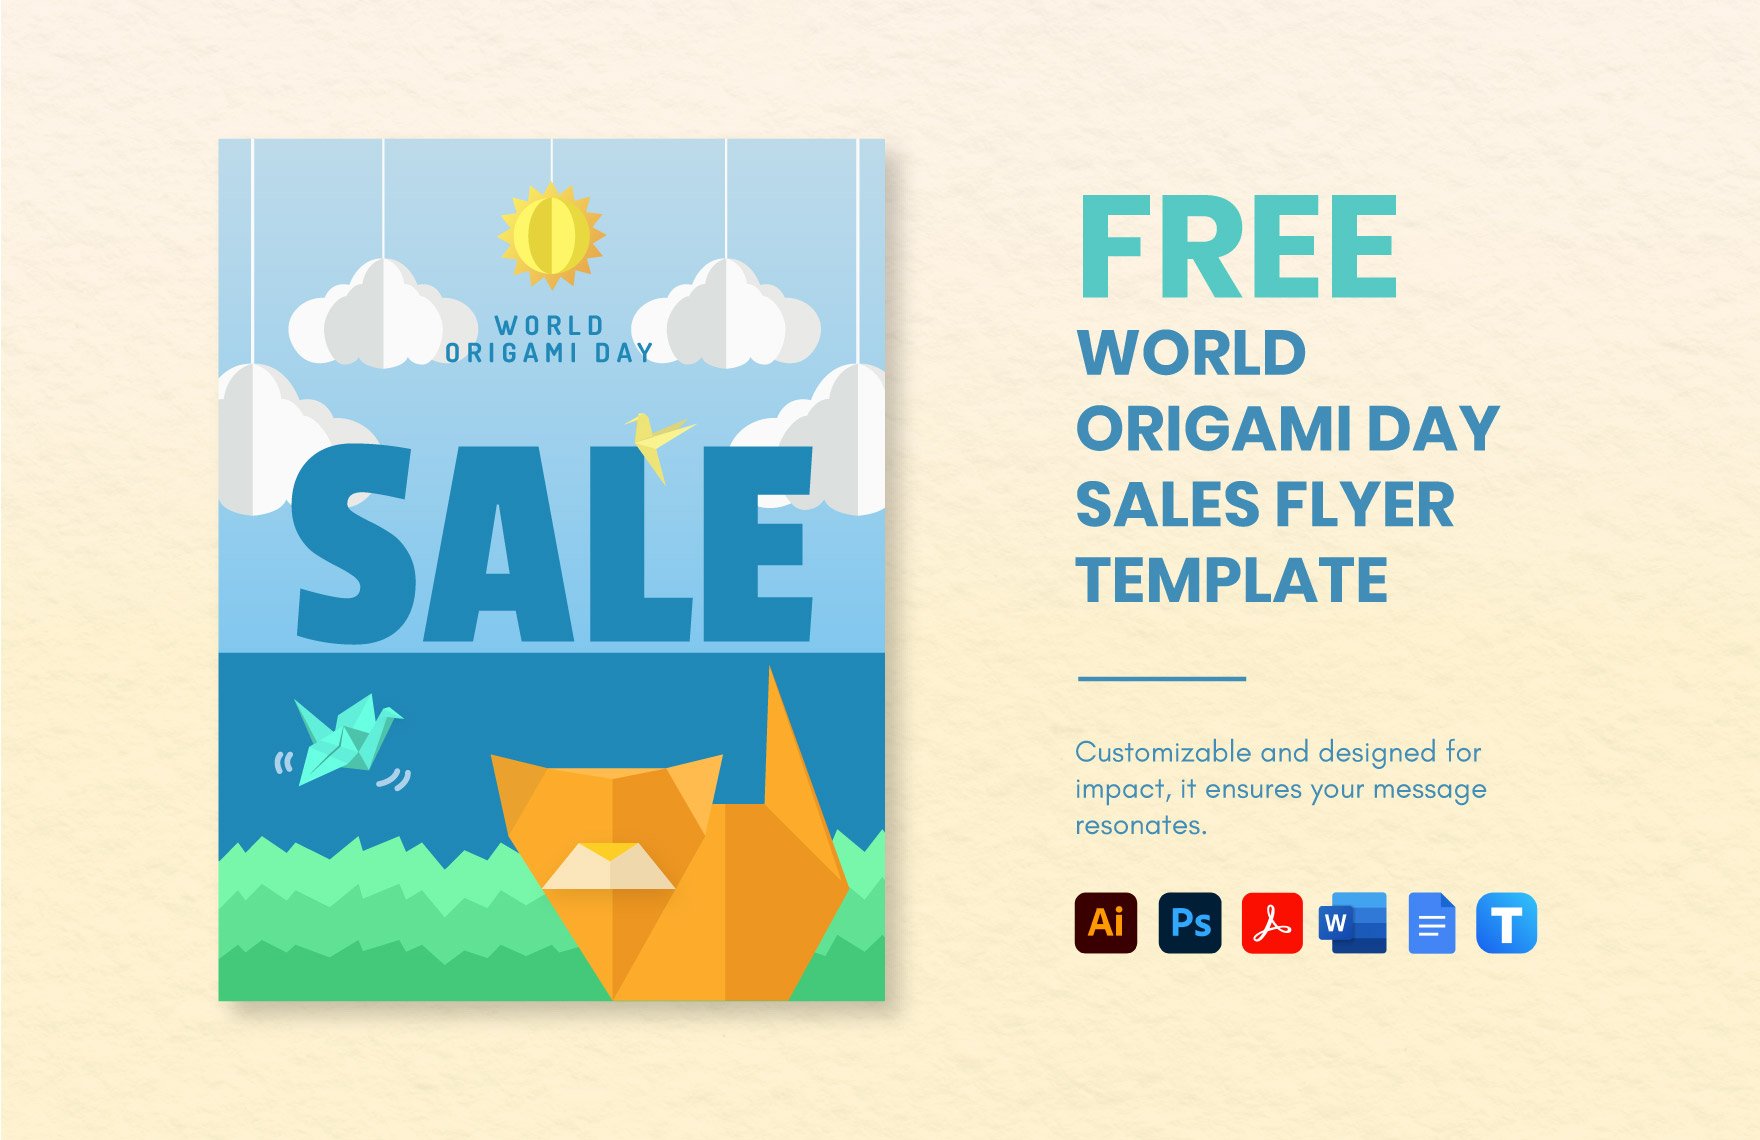 World Origami Day Sales Flyer Template